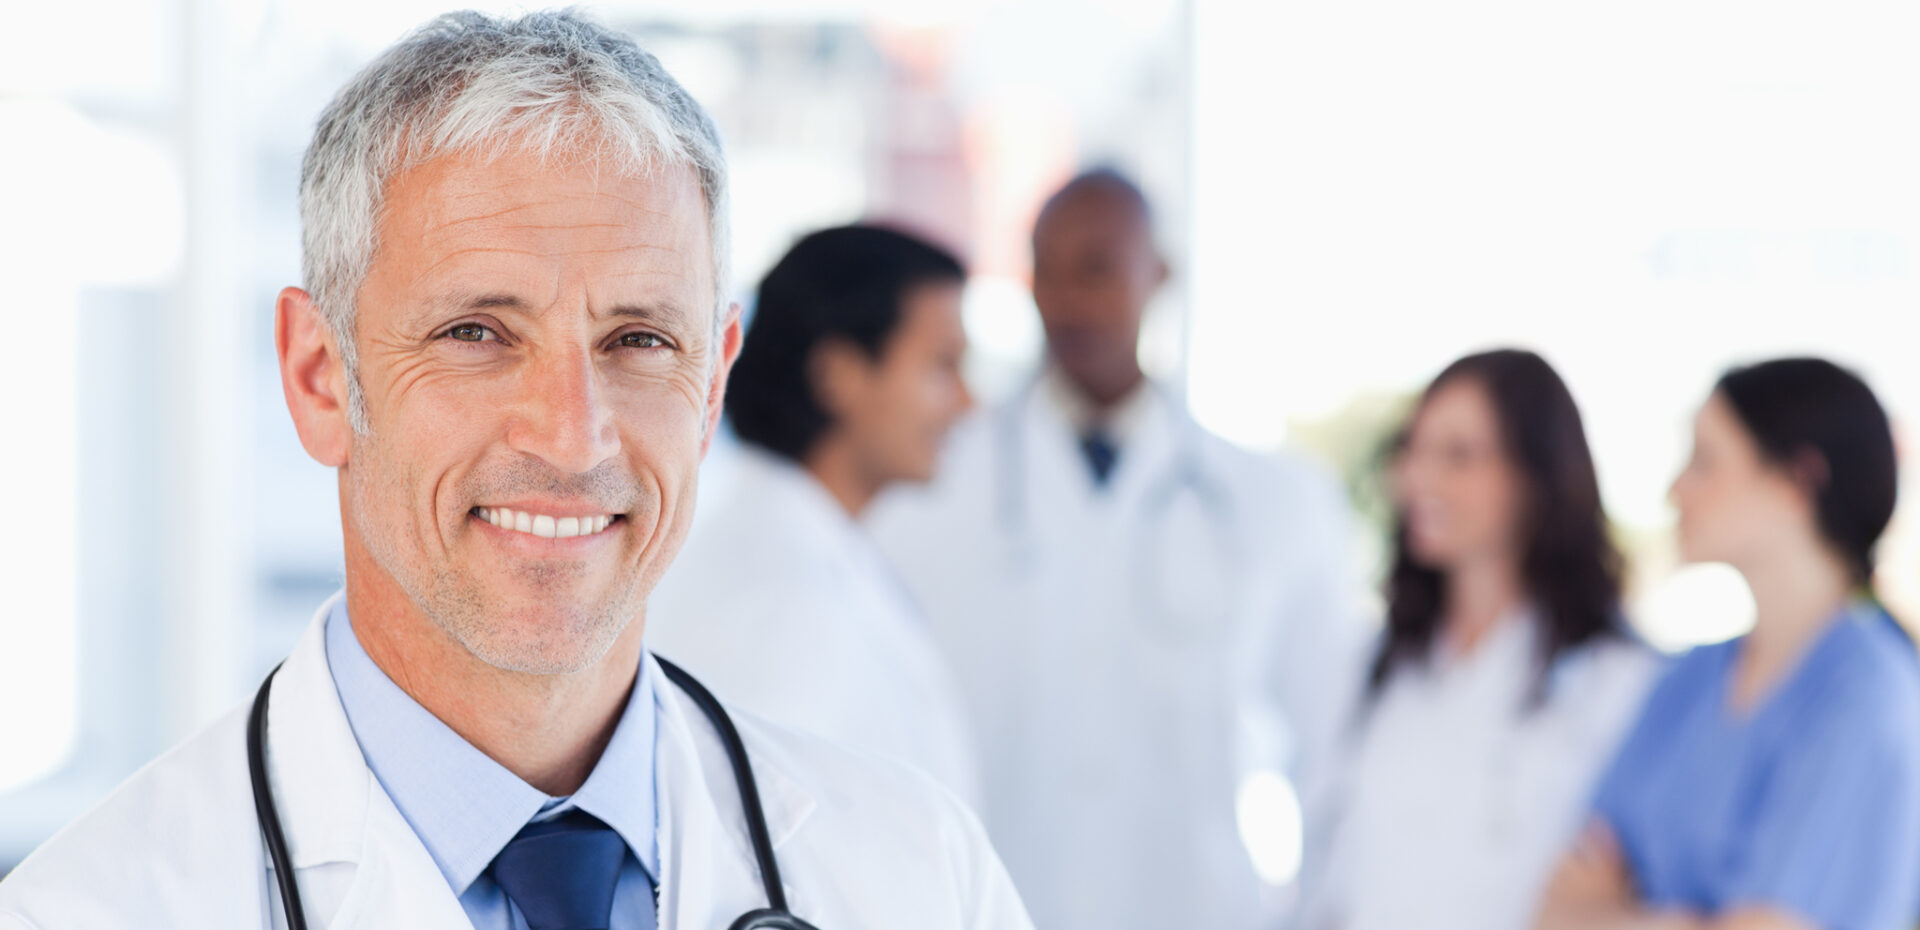 Gray haired doctor wearing stethoscope and smiling